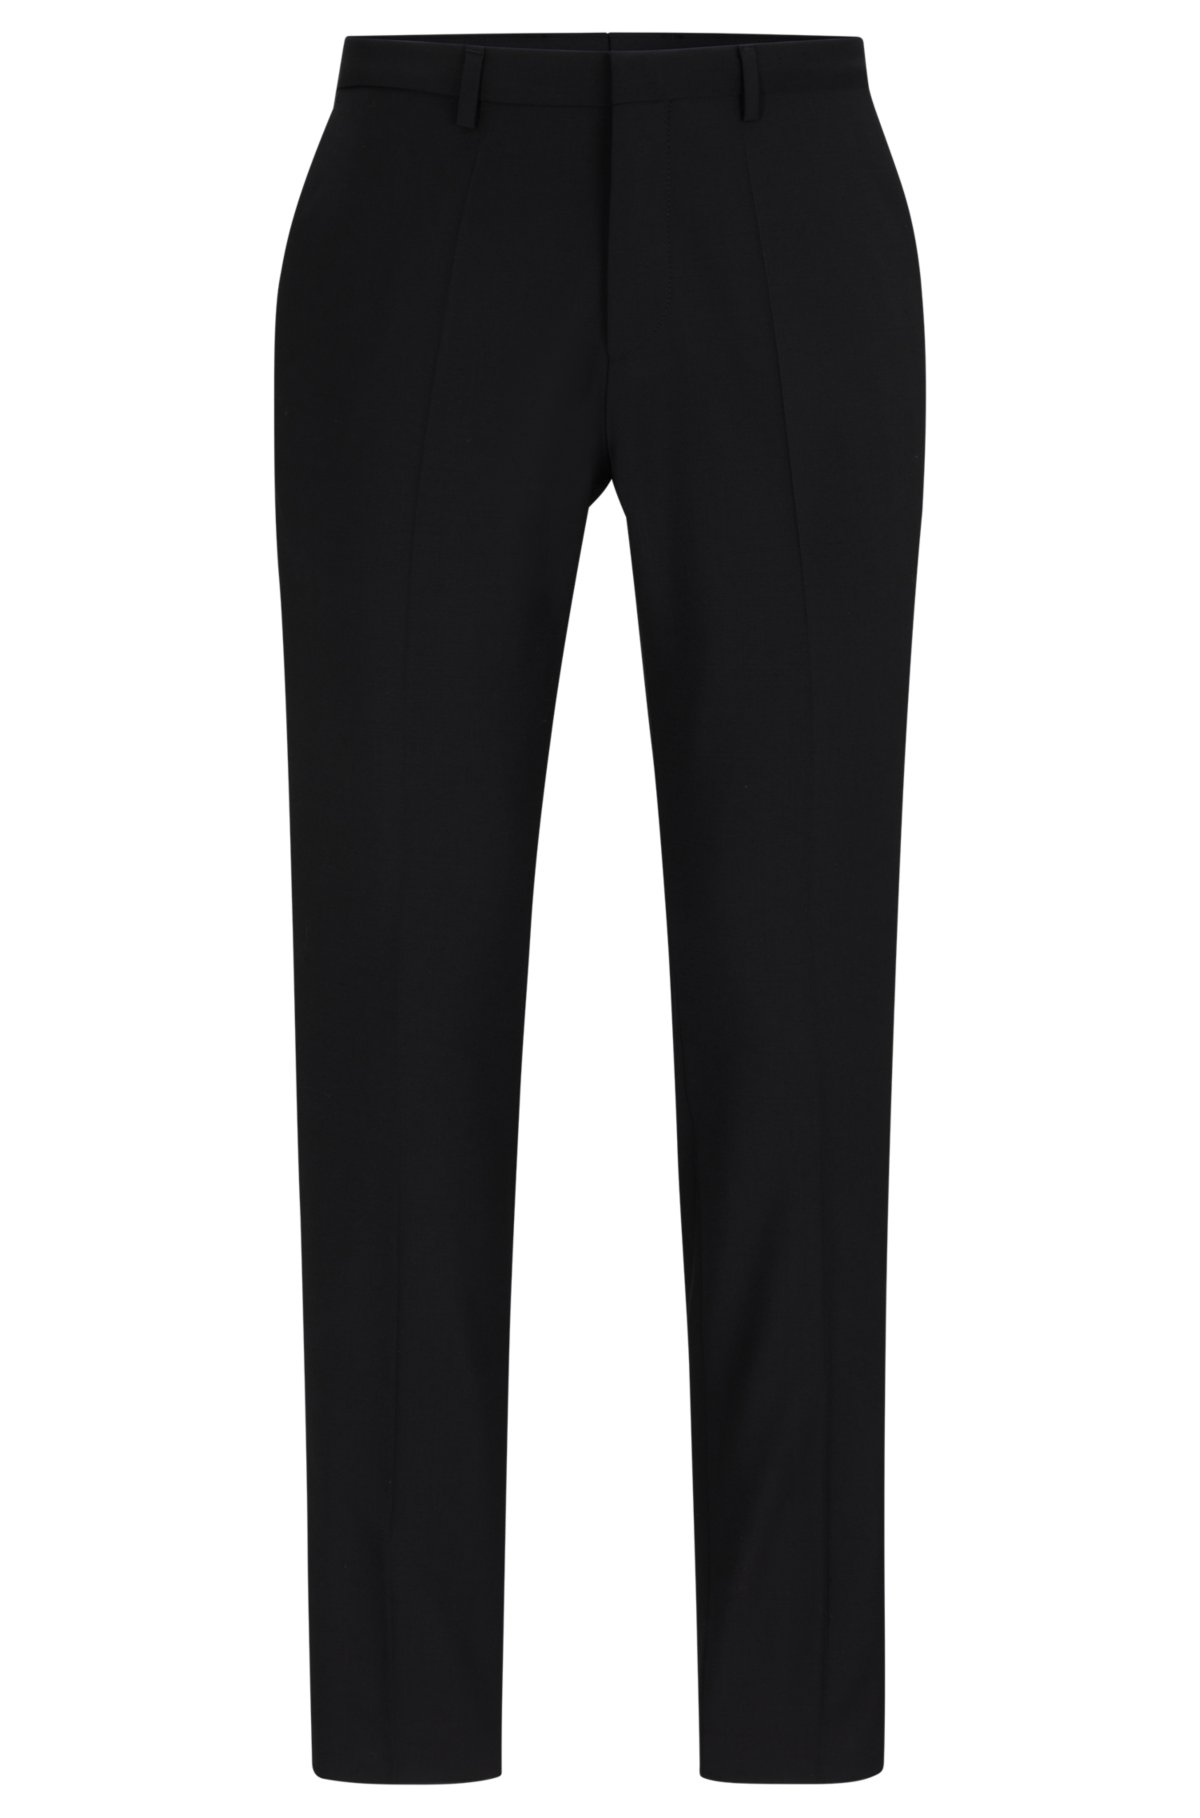 Extreme Slim Fit Polyester Blend All Pants